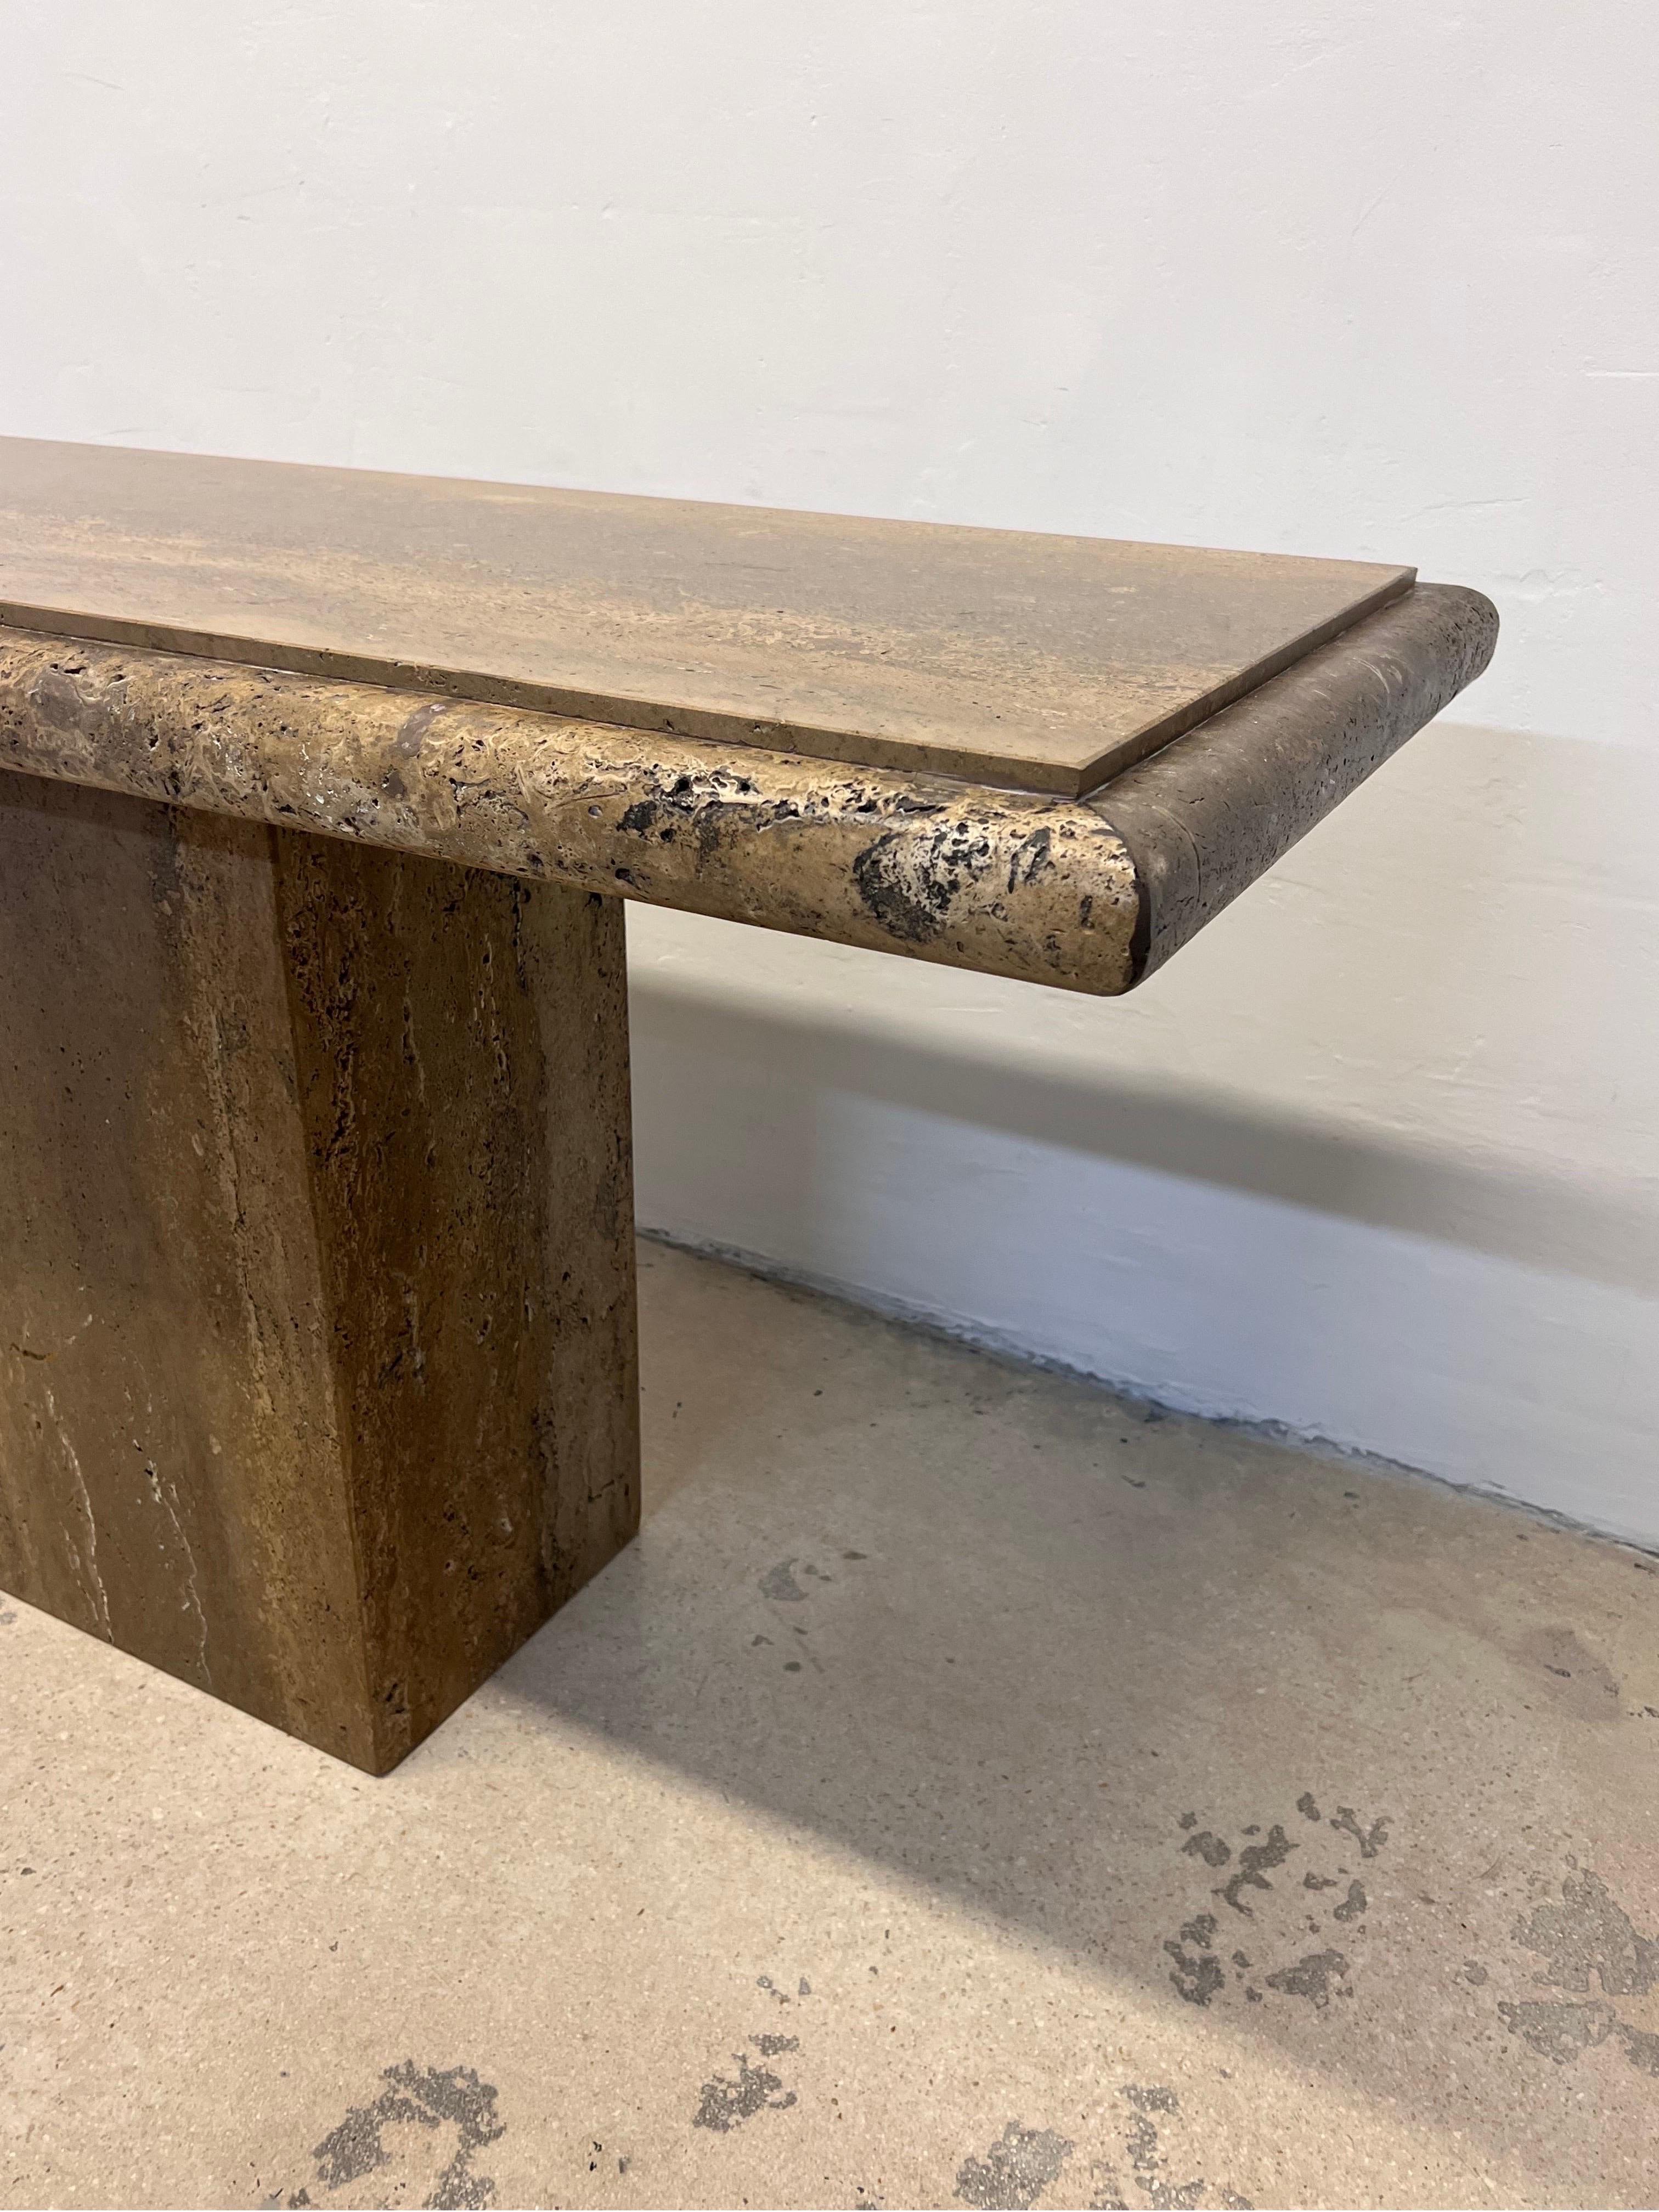 Polished Italian Travertine Bullnose Console Table, Italy 1970s For Sale 3